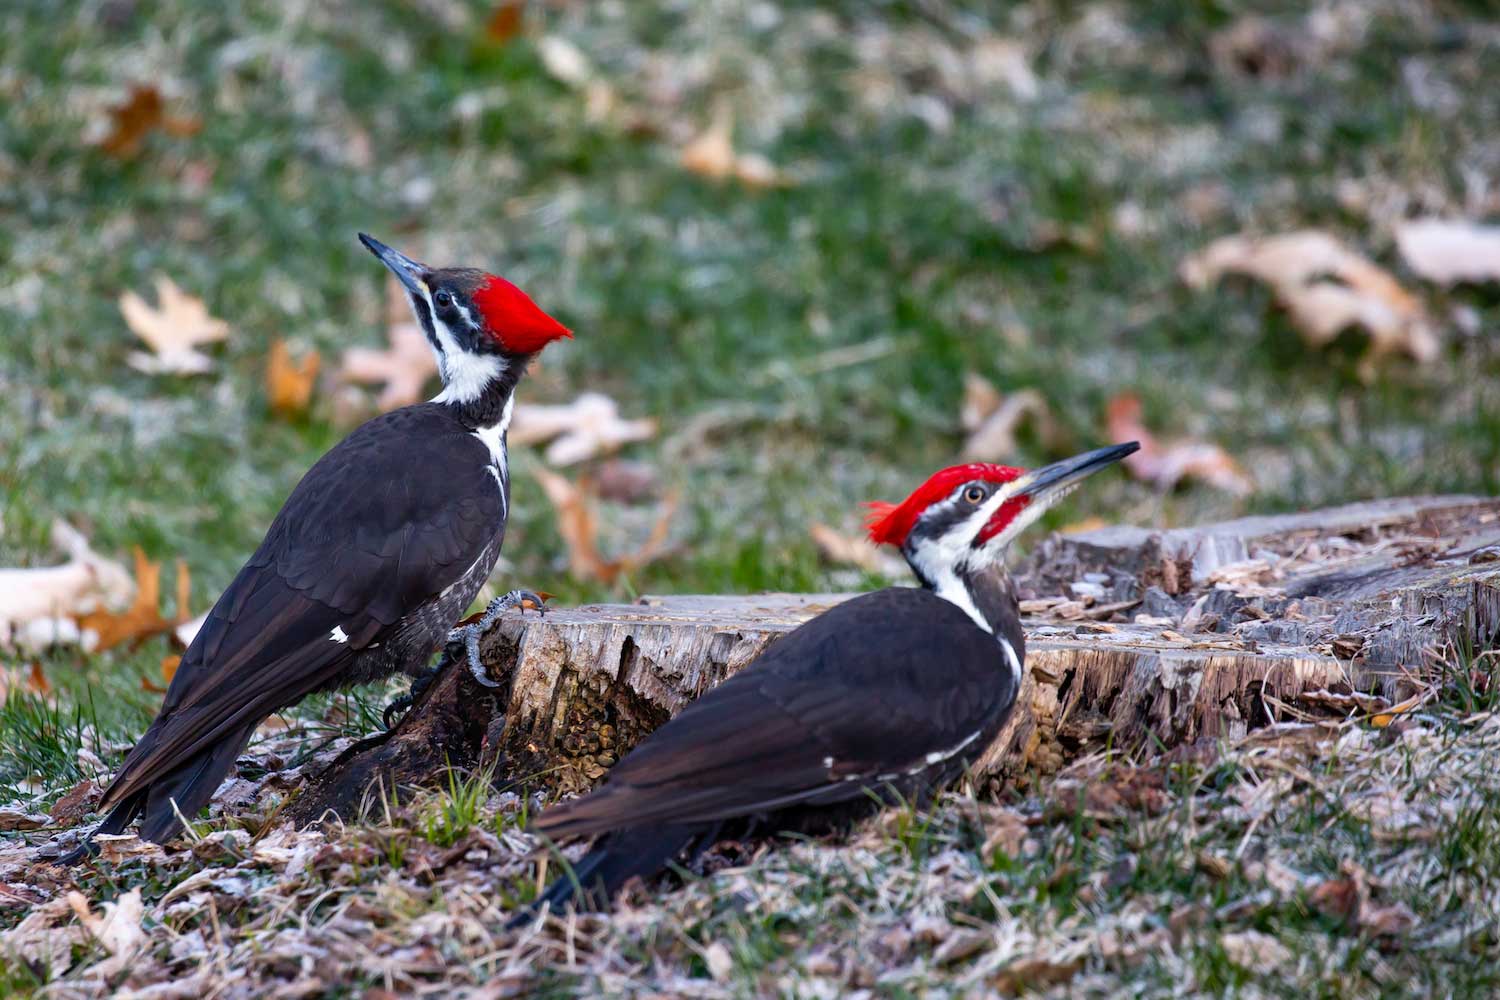 Two pileated woodpeckers on the ground.